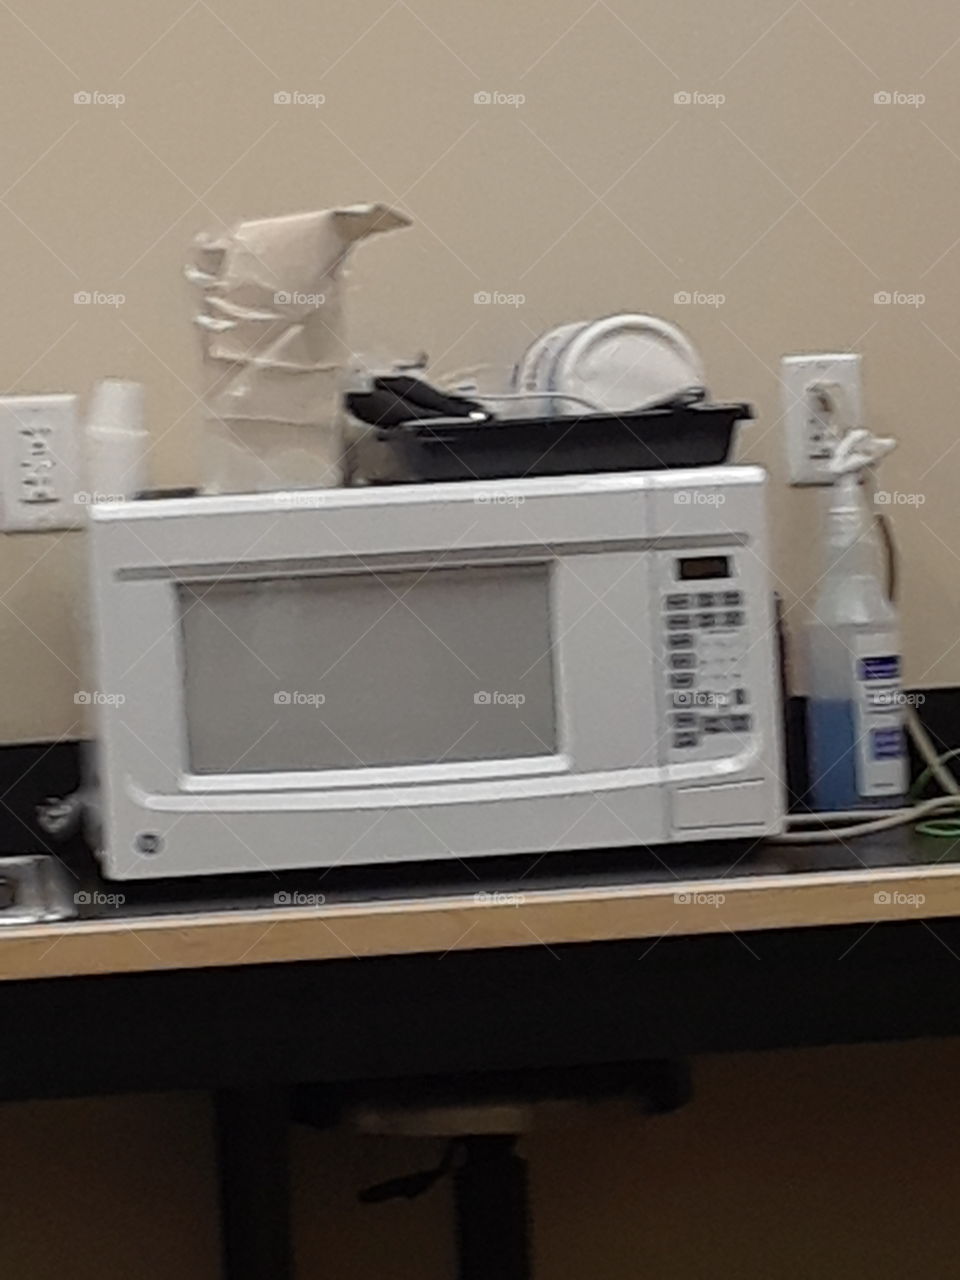 busted microwave at sprouts. alea u suck for suspending me.i work harder then you with cart man everyday. I did 7 today.i wanna see u sweat n get it in your eye.see how u like it.fix this equipment here at store. U talk about team play.ya right.